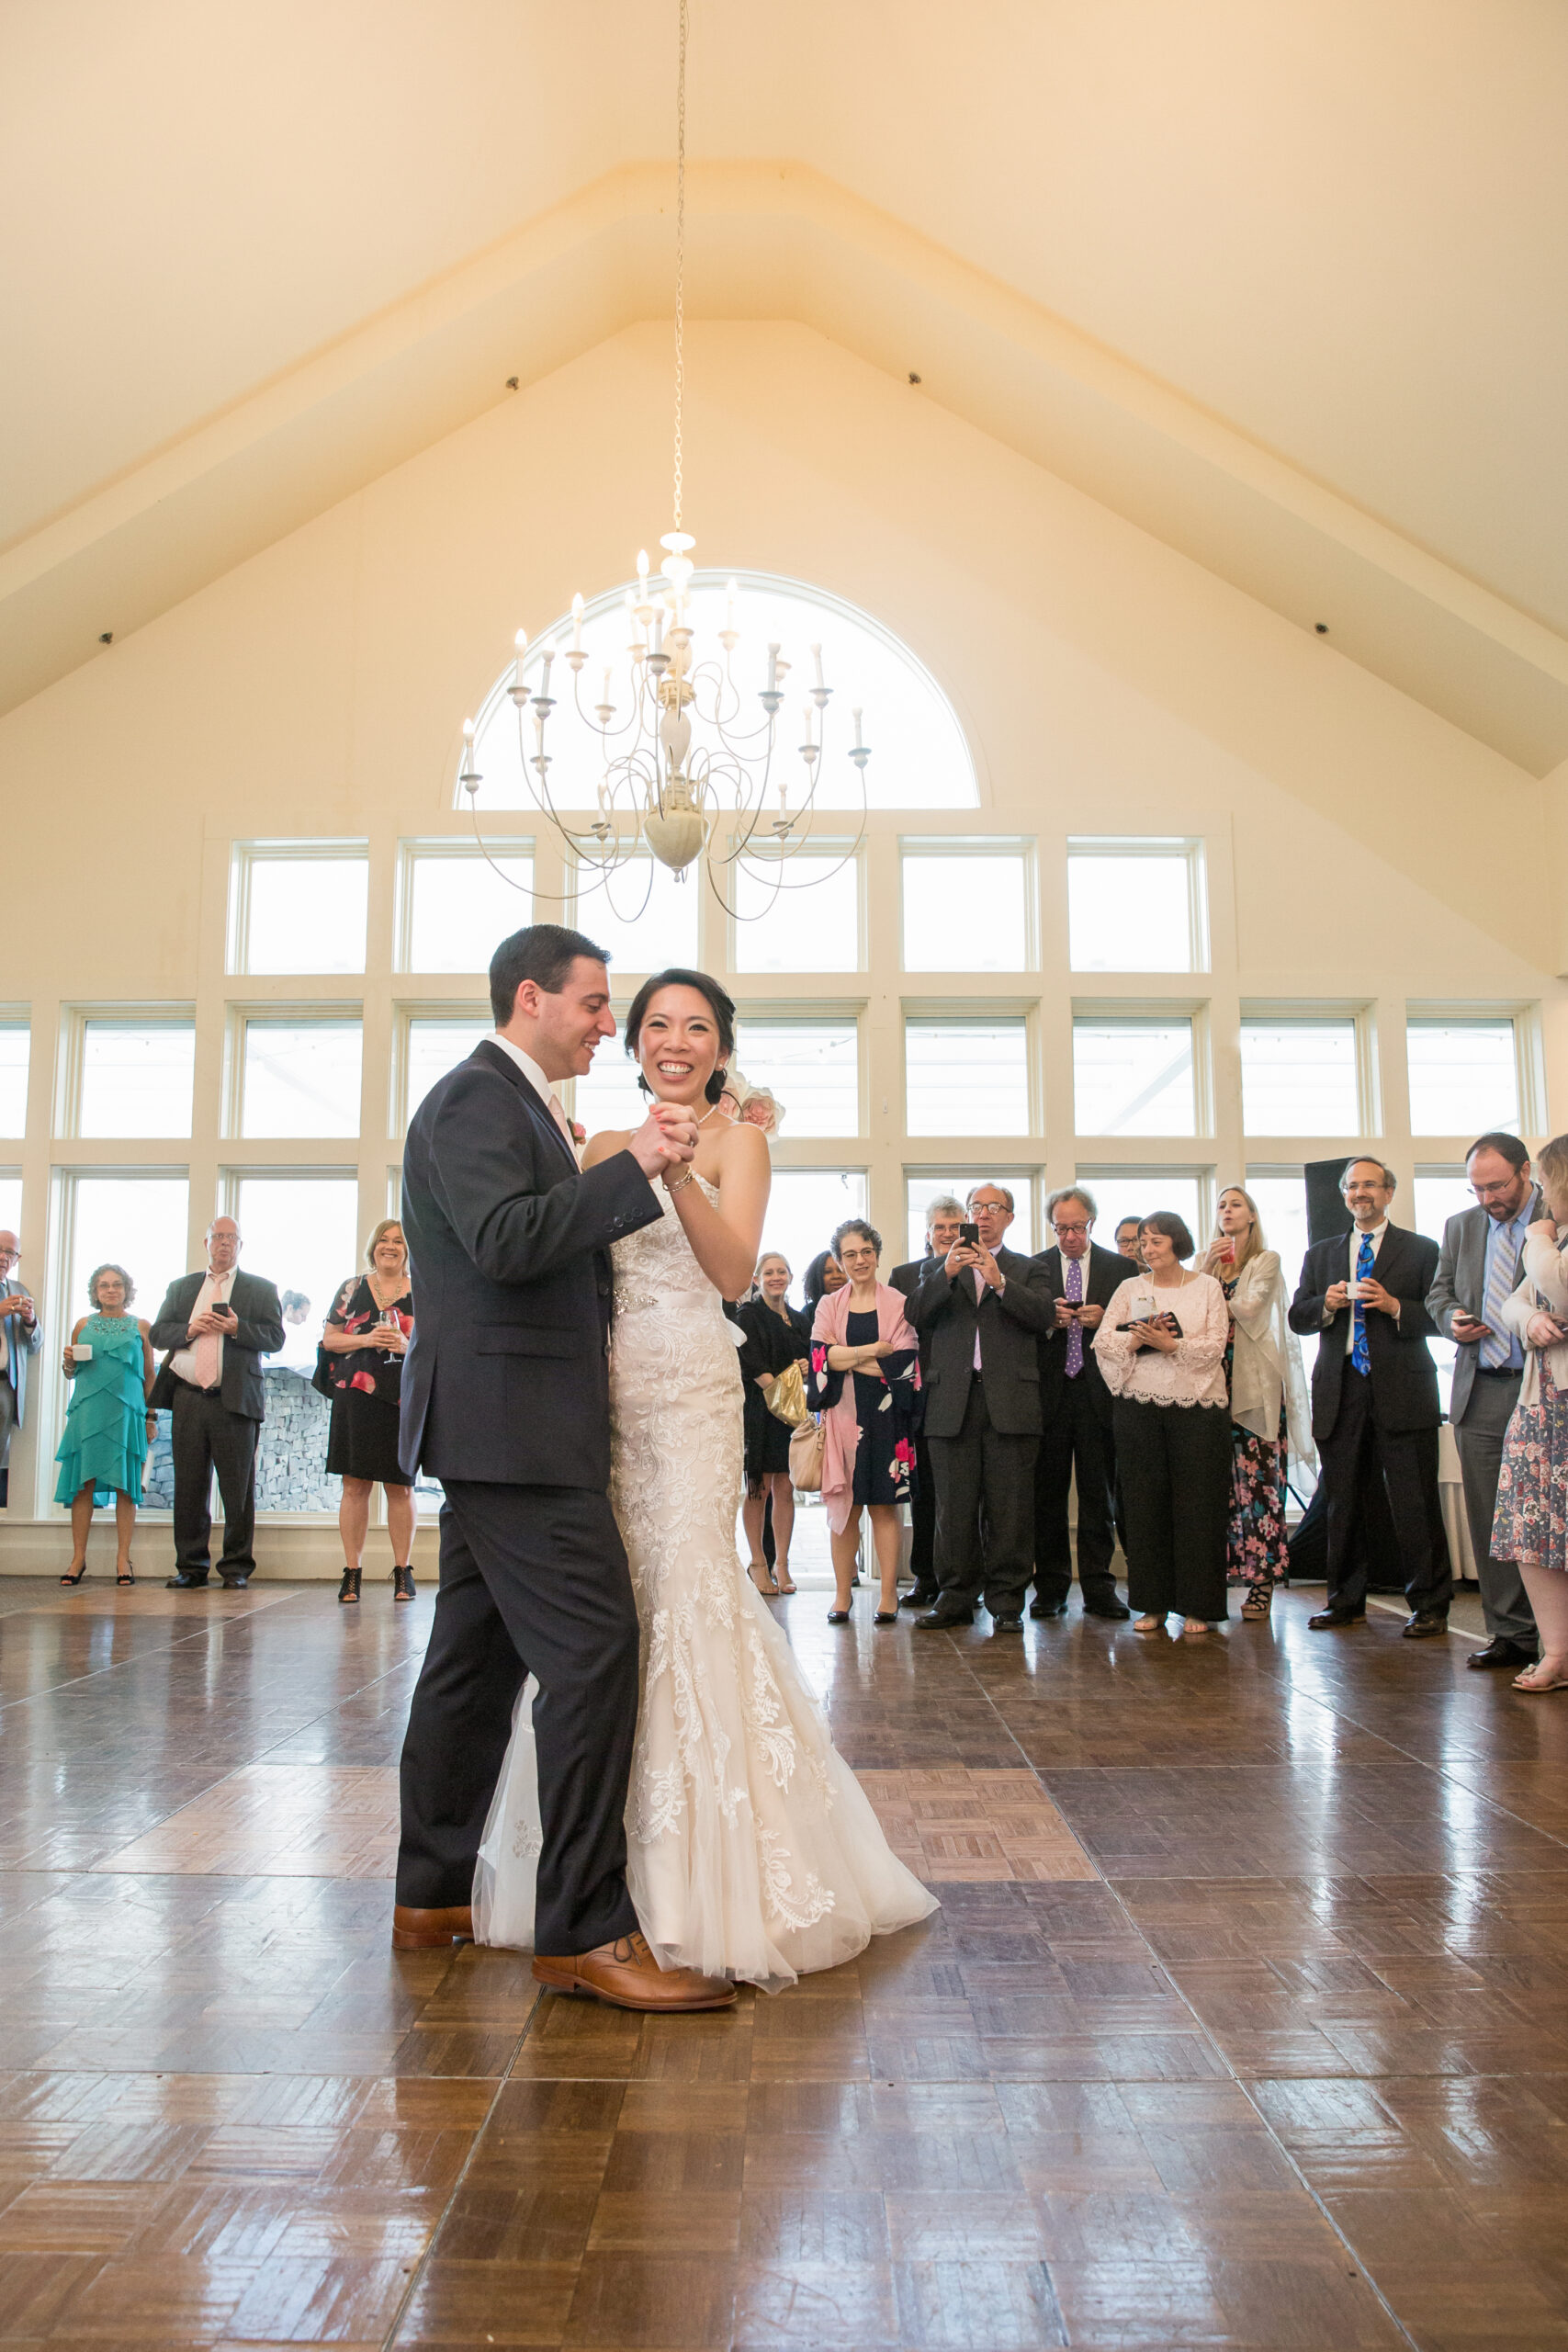 The Ball Room at White Cliffs Country Club is elegant and decorated in neutral shades. 